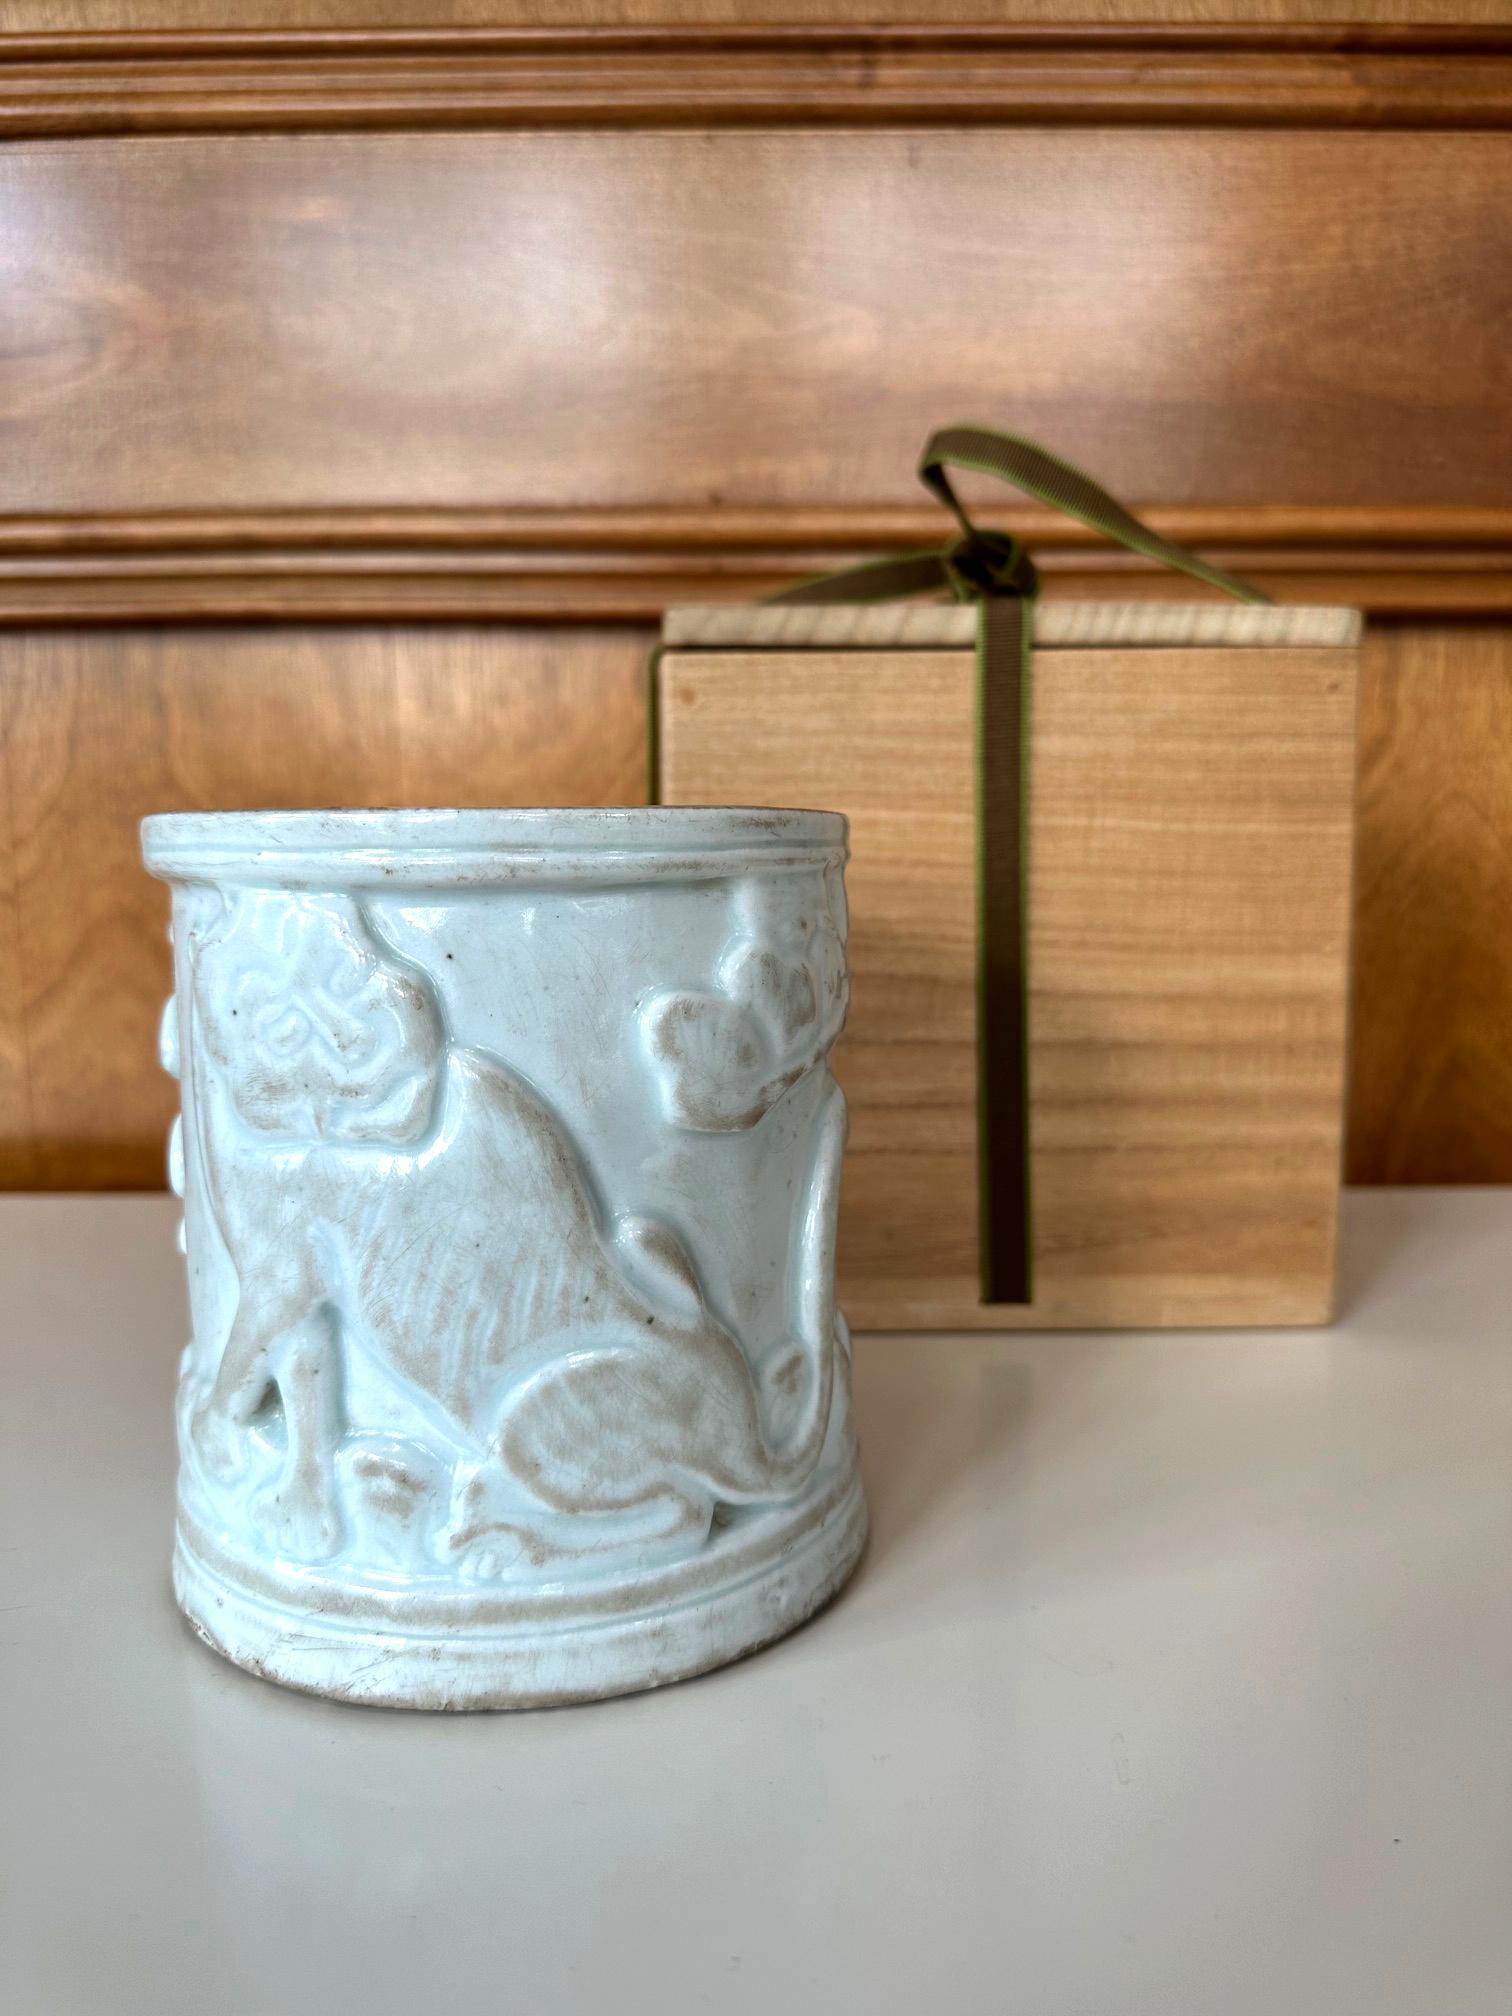 A lovely Korean white porcelain brush holder with carved relief design from late Joseon dynasty (circa 19th century). The brushpot is highlighted with one of the most beloved motifs in Korea, a crouched tiger (Ho). Low relief carving was used to